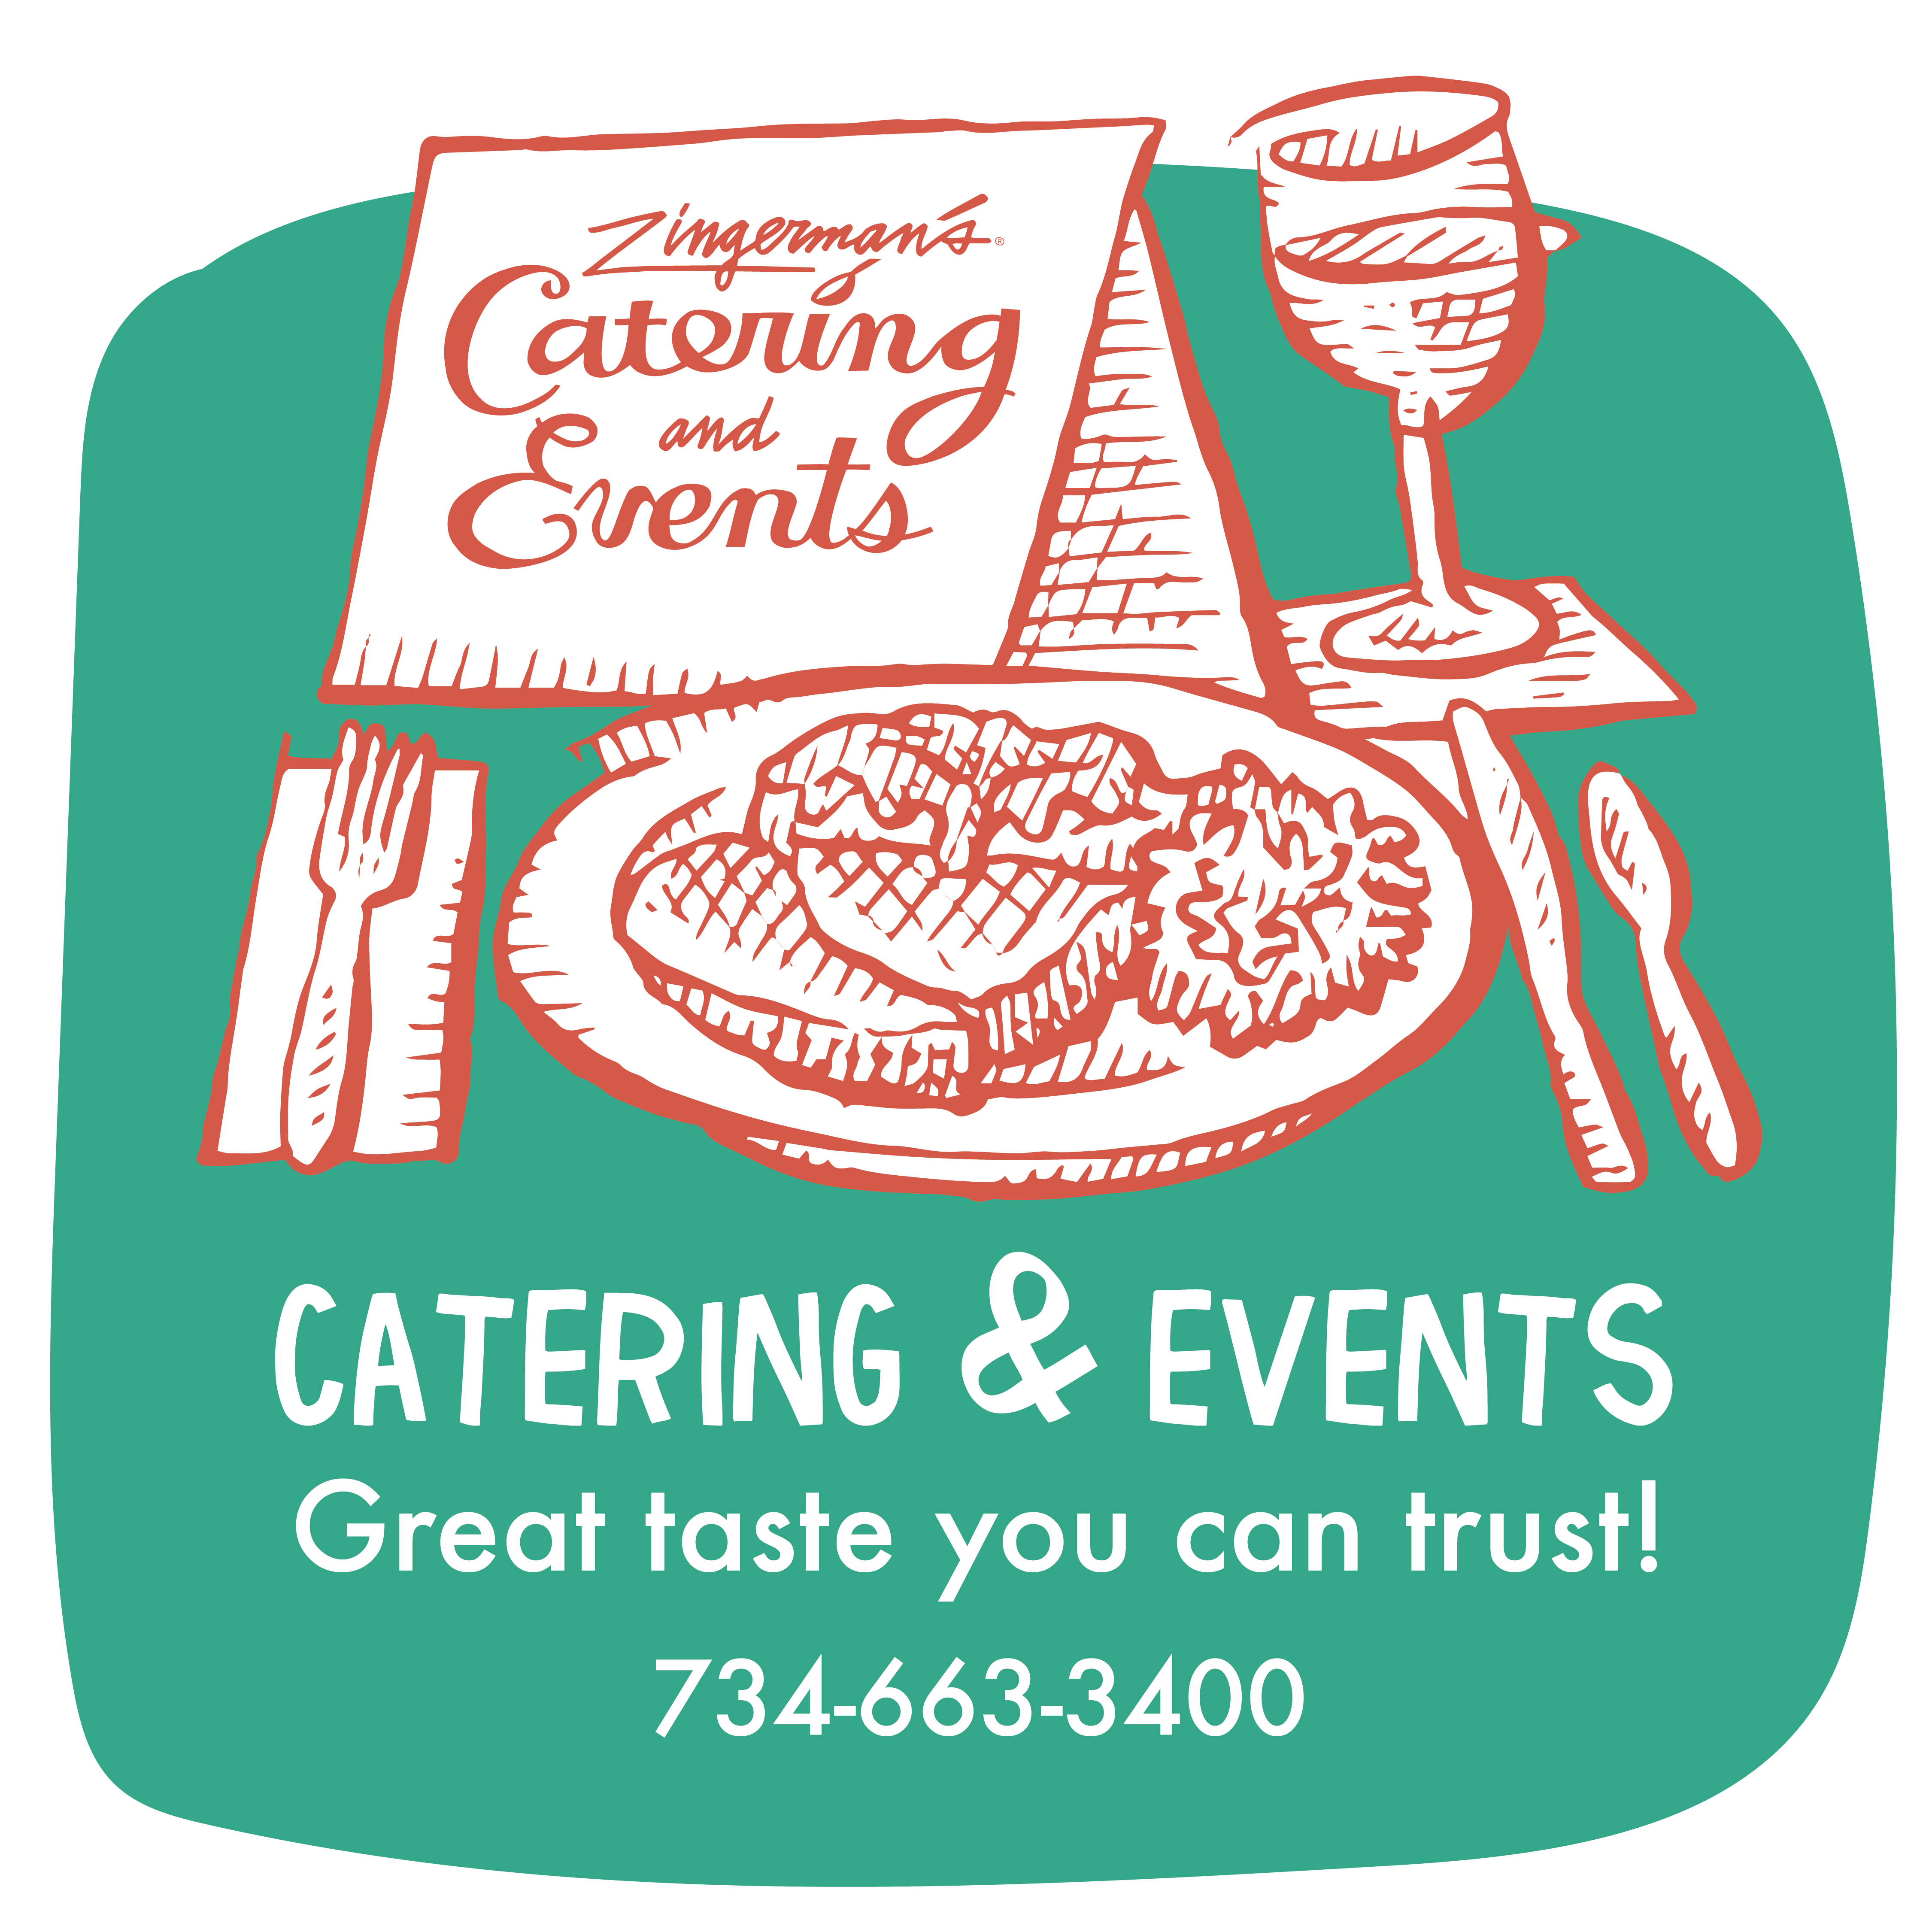 zingerman's catering and events great taste you can trust